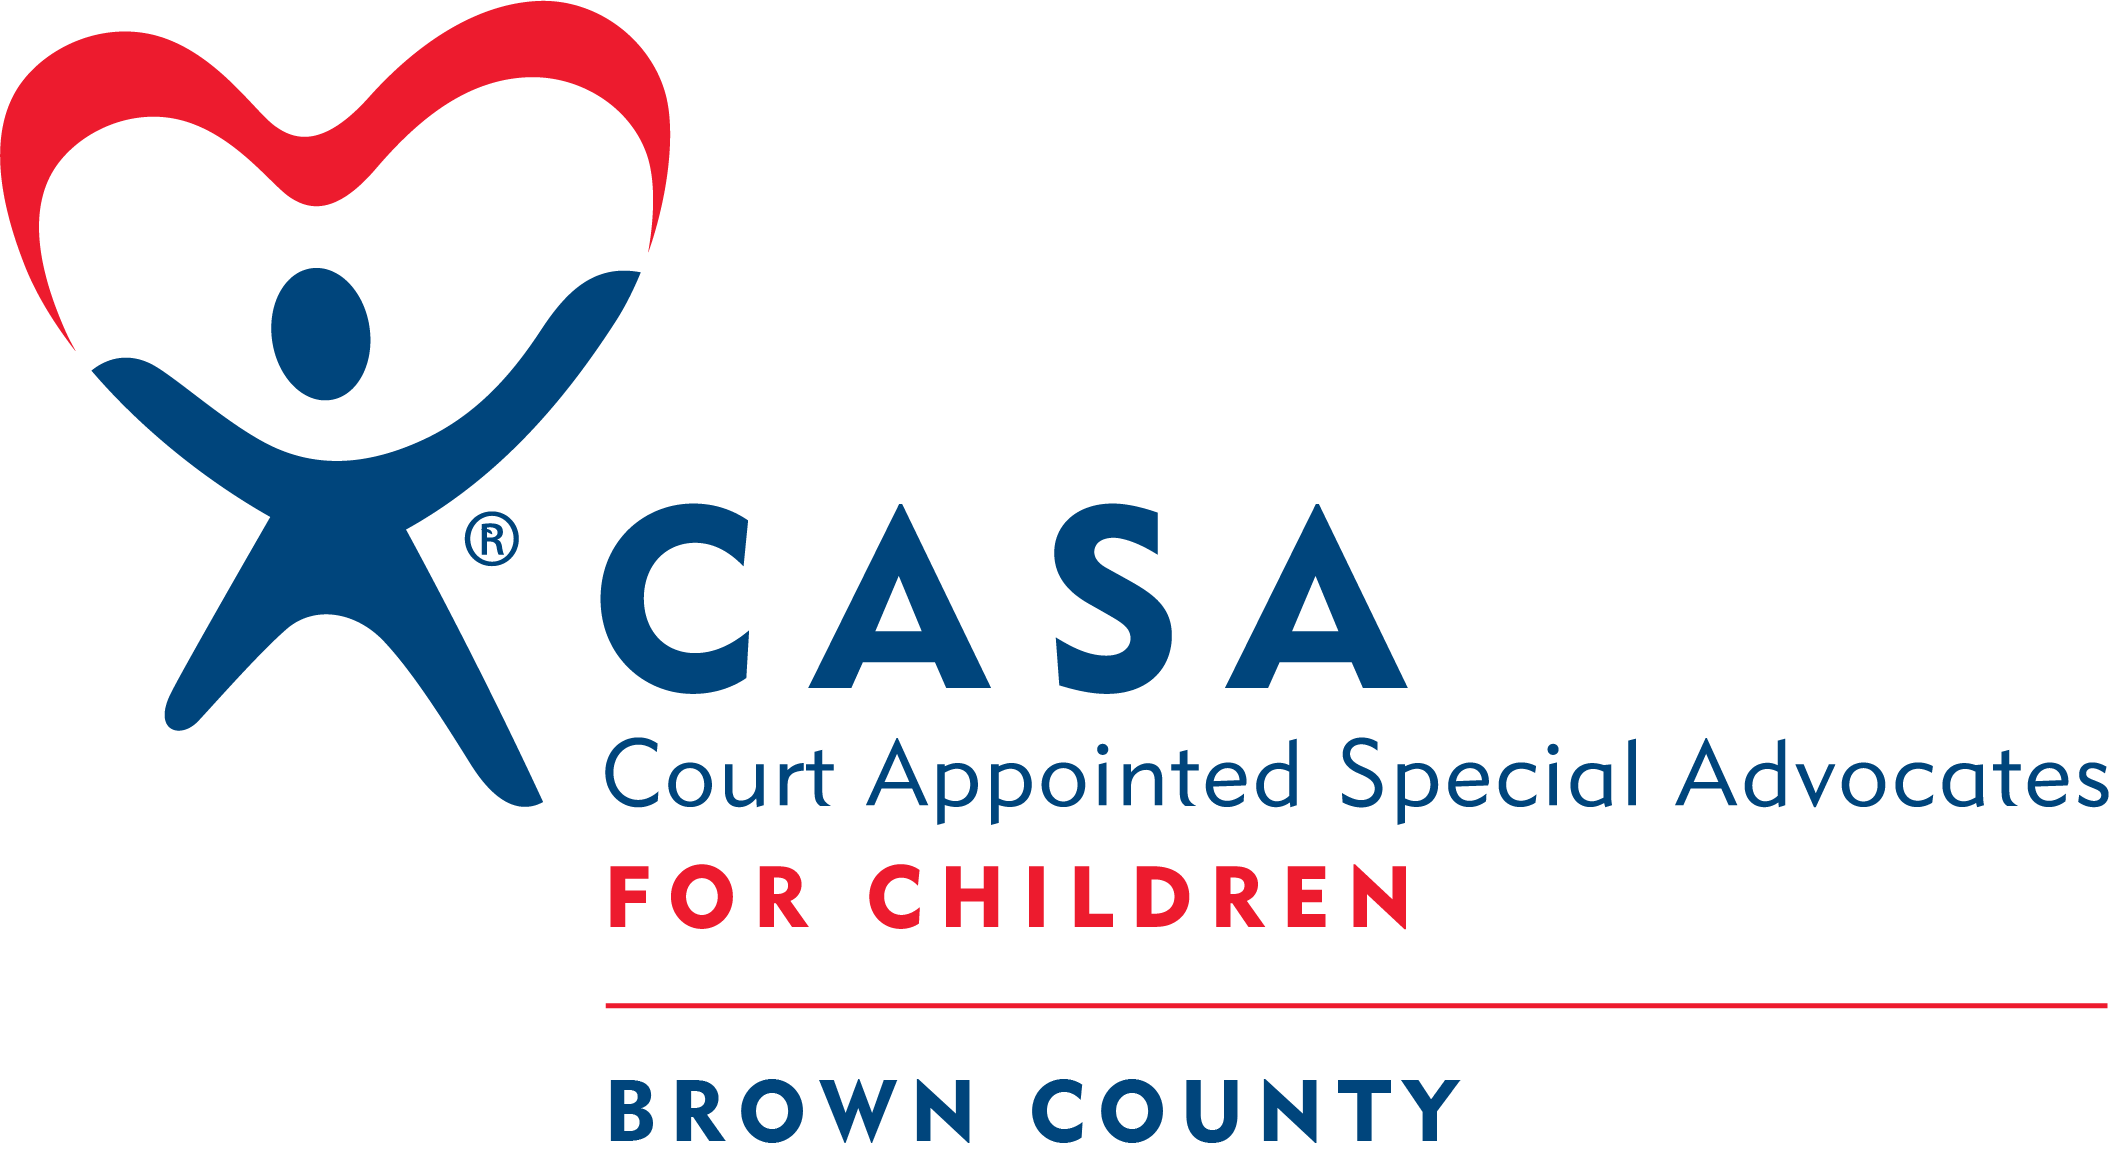 CASA Court Appointed Special Advocates for Children logo